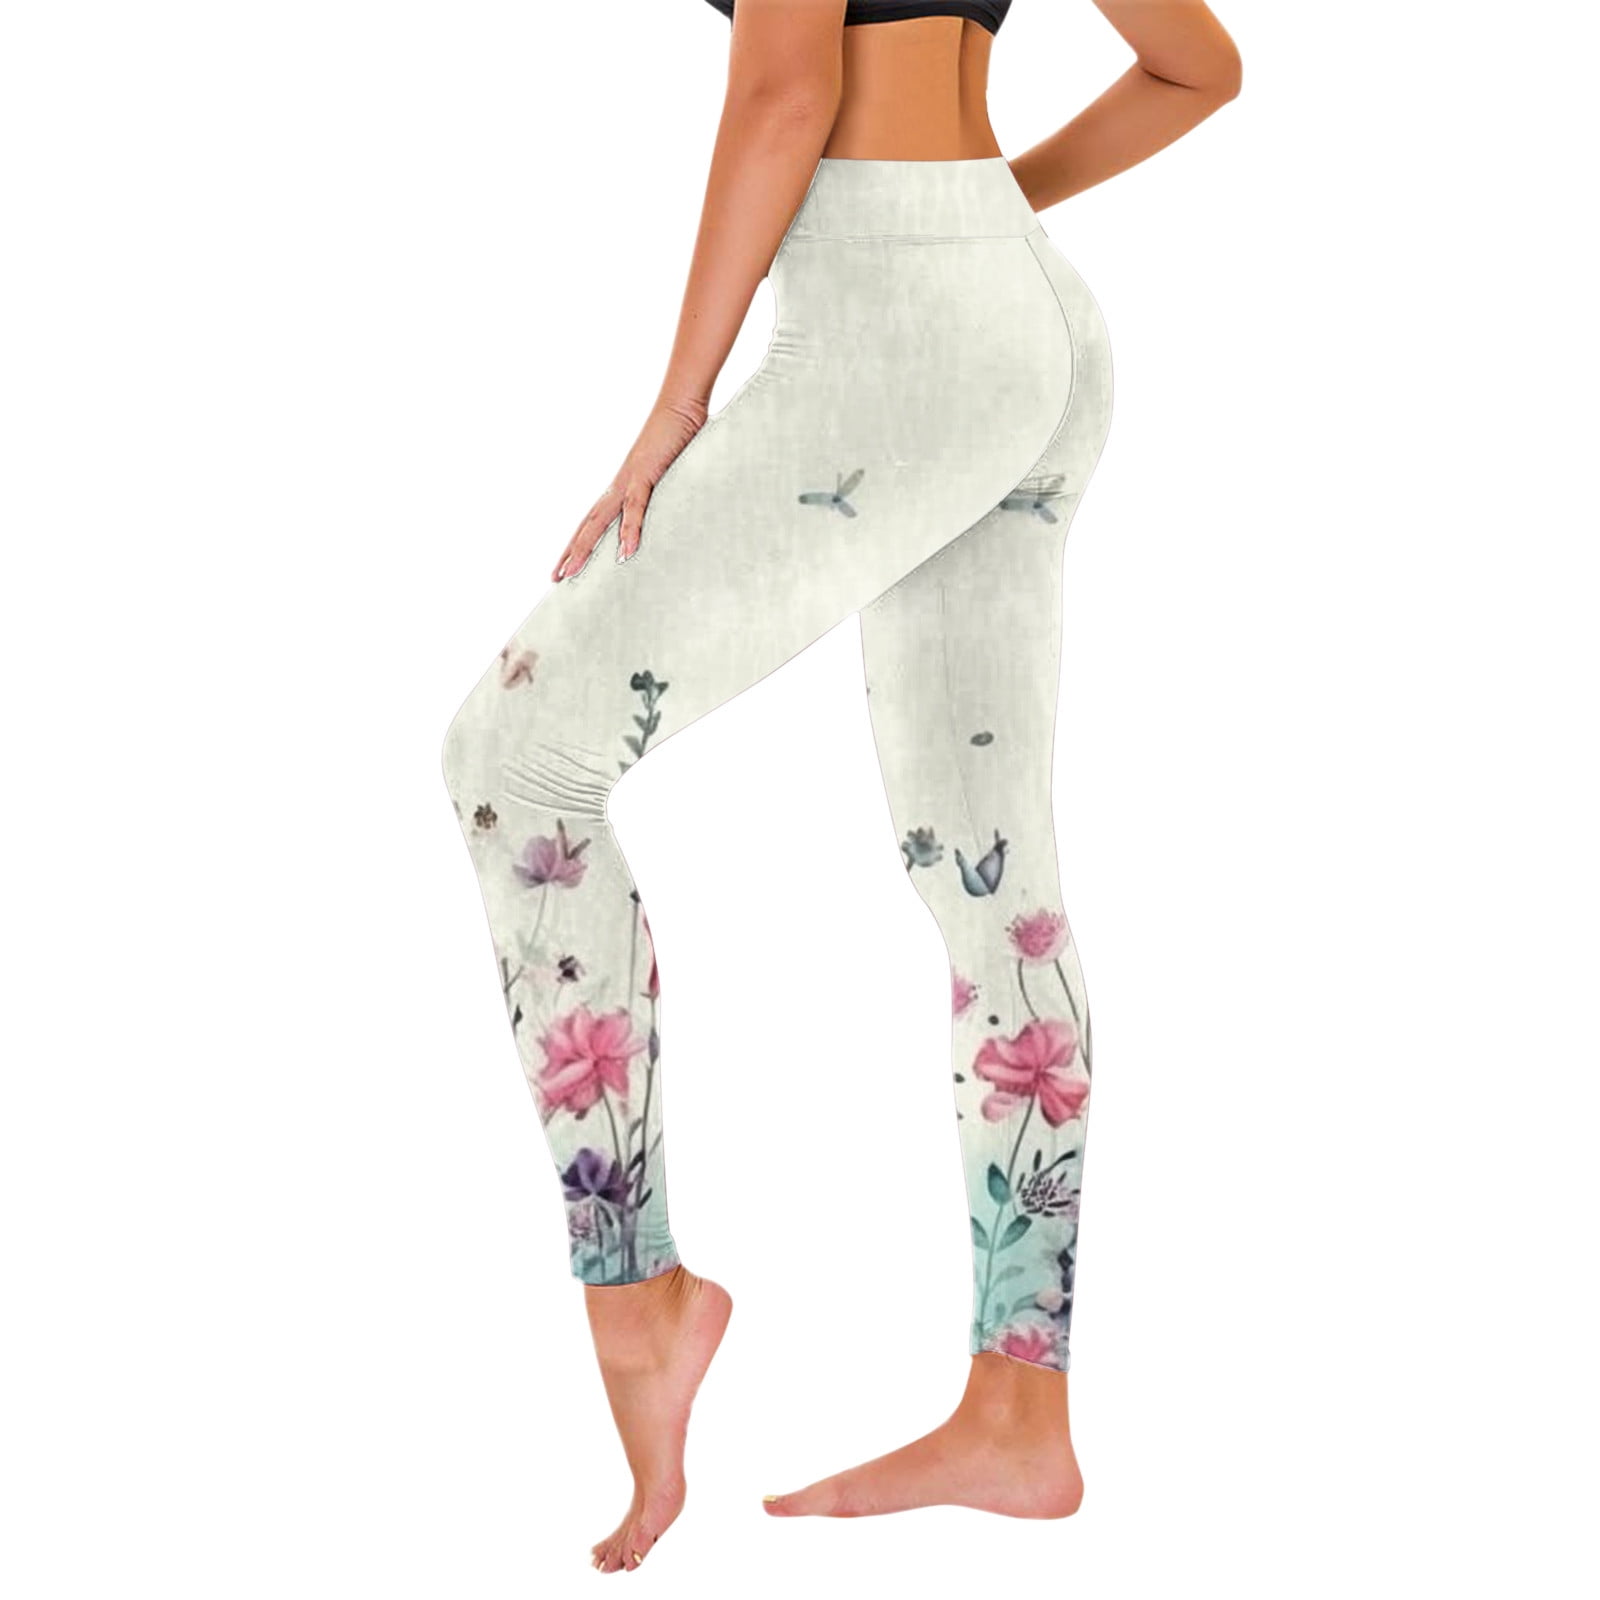 HSMQHJWE Yoga Pants for Women with Pockets Cotton Women's Print Workout  Leggings Fitness Sports Running Yoga Pants Yoga for Women Pants 